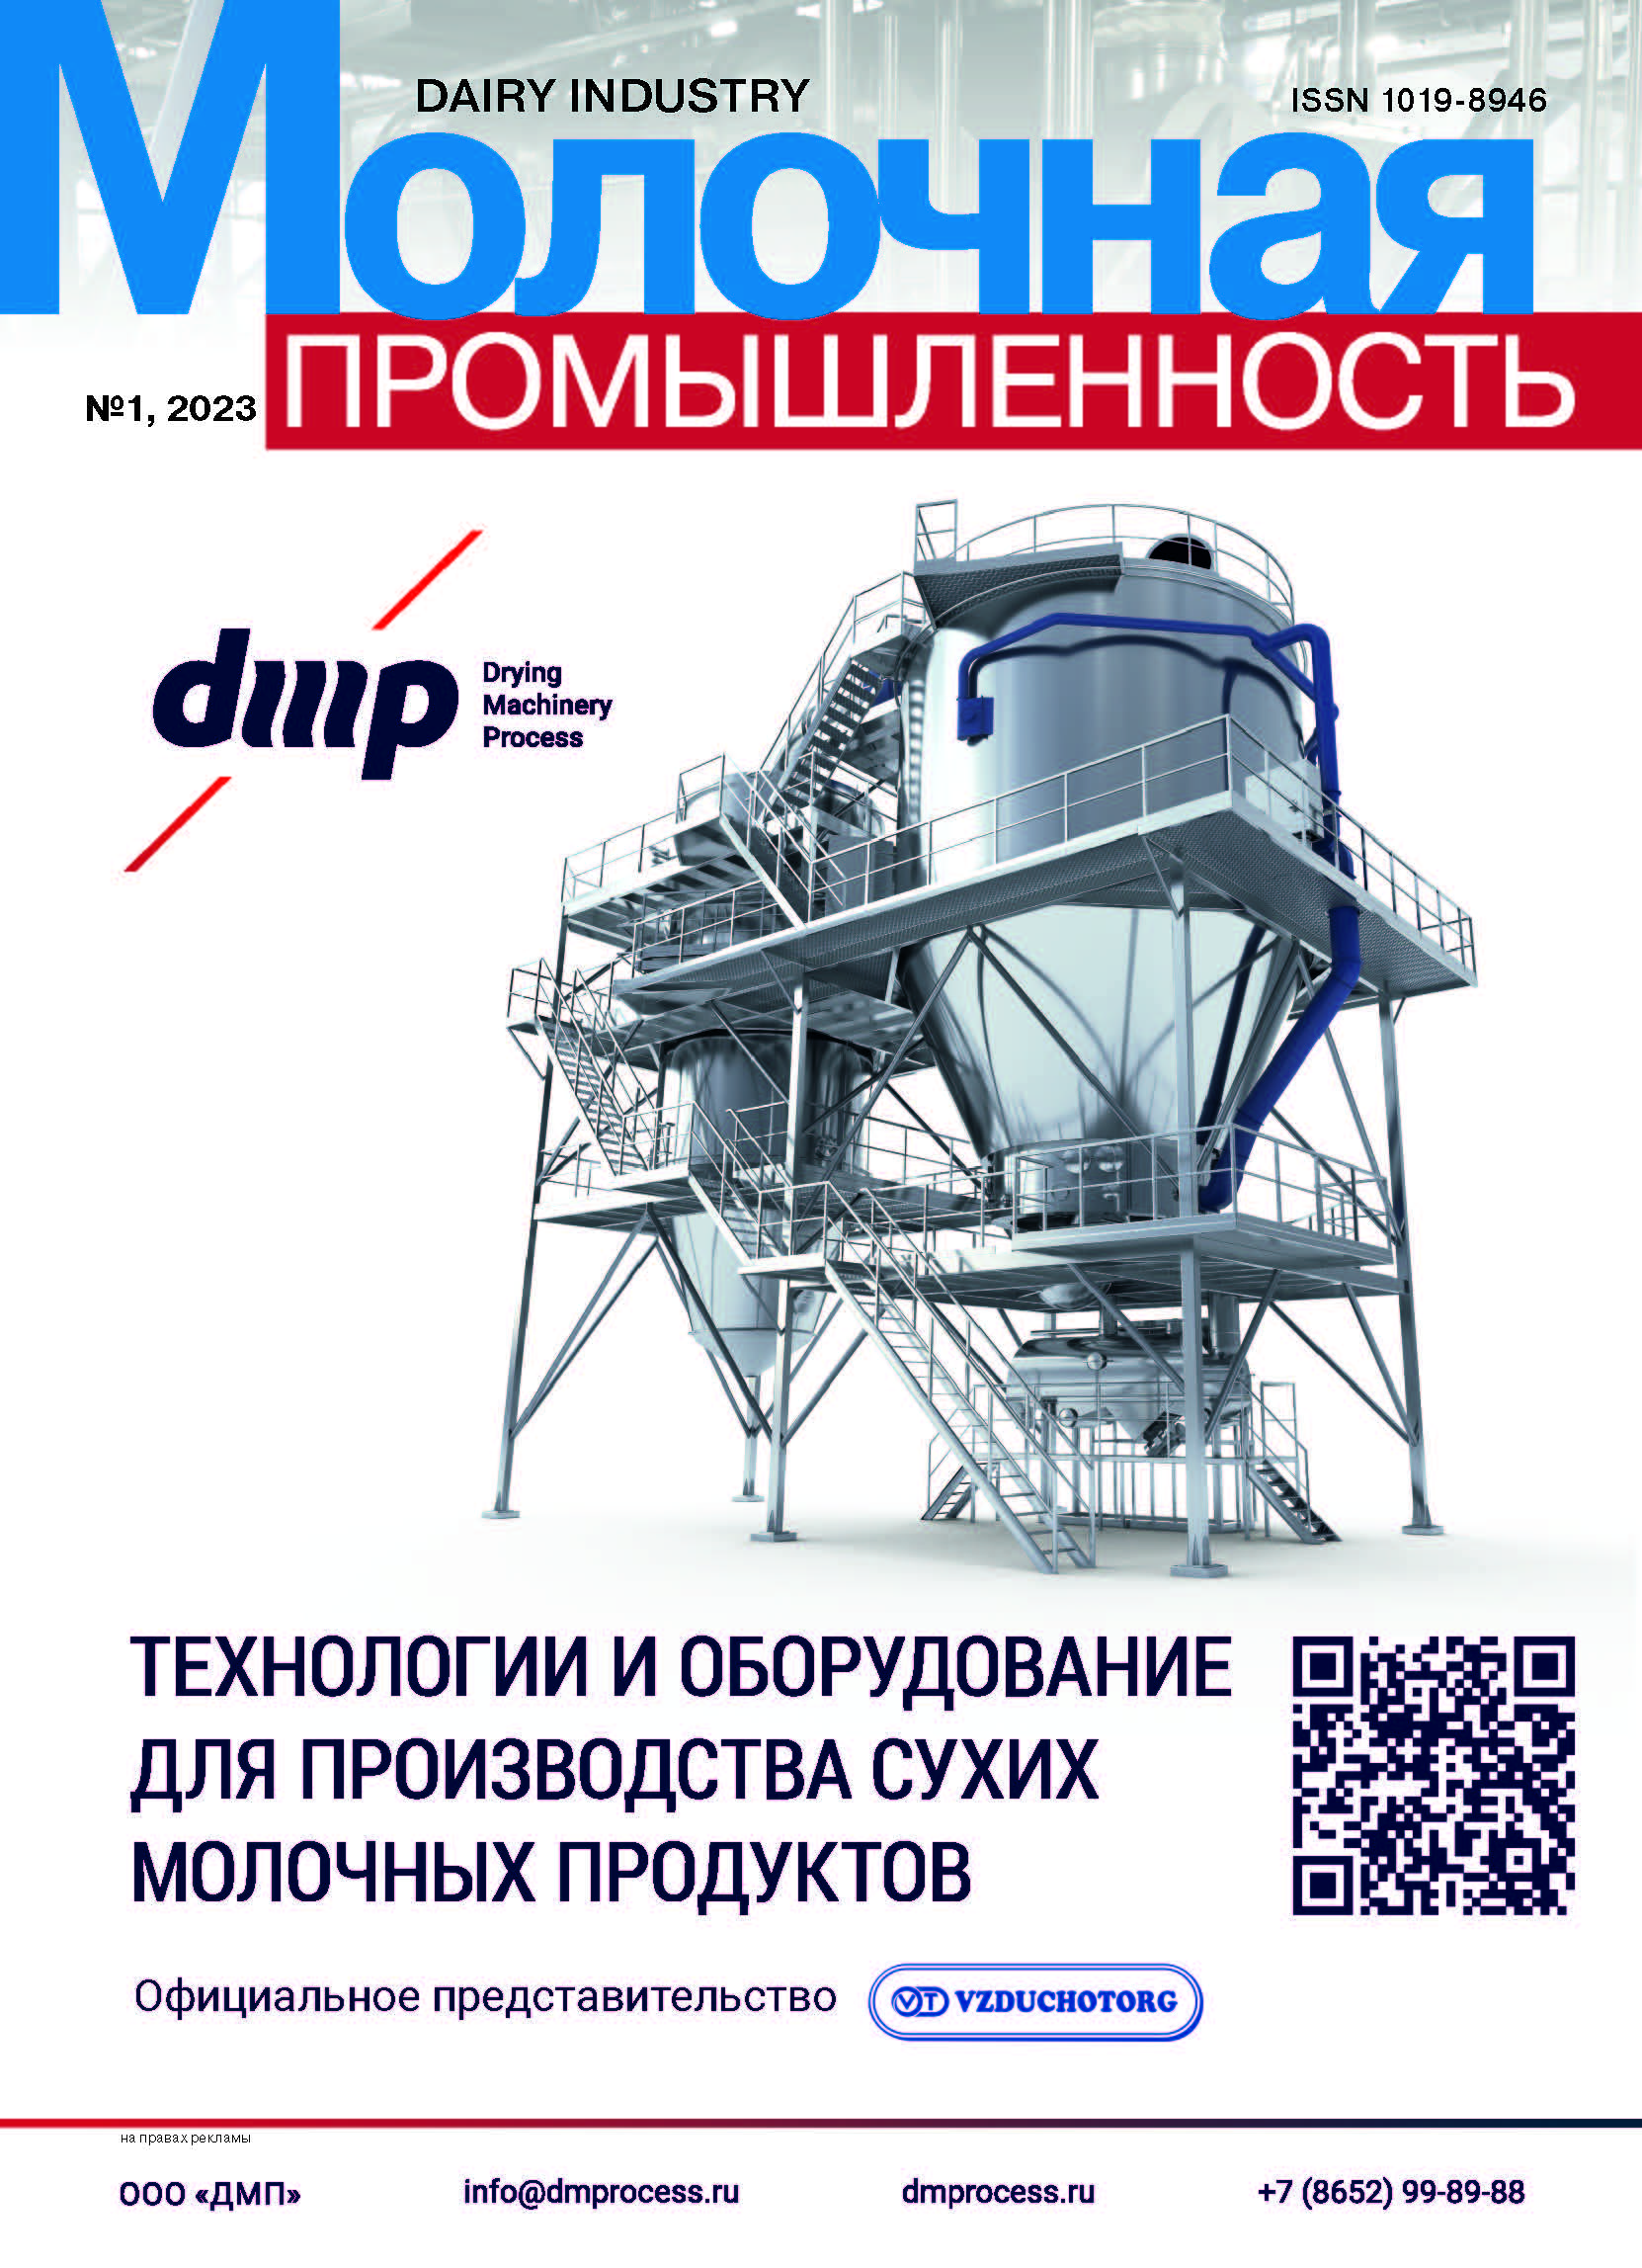                         Training manual and guidance for professionals in the processing of secondary dairy raw materials
            